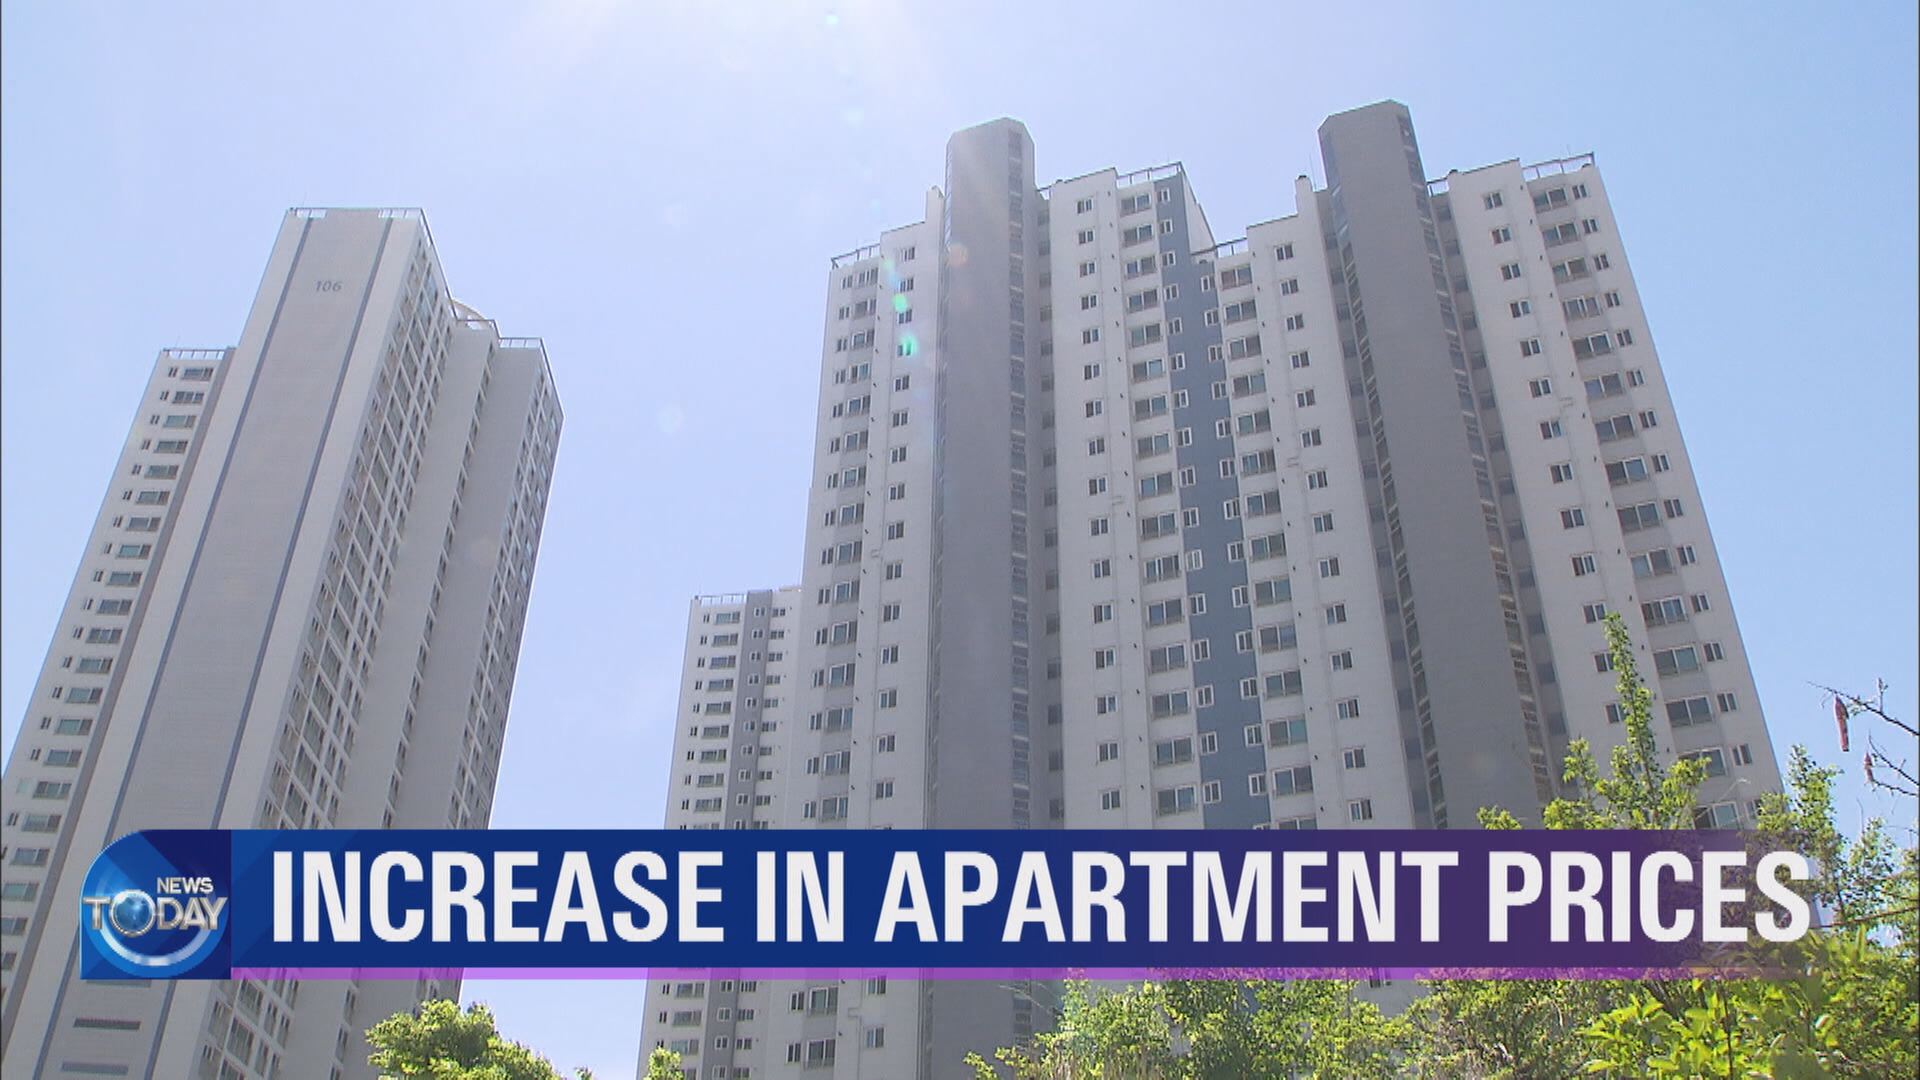 INCREASE IN APARTMENT PRICES